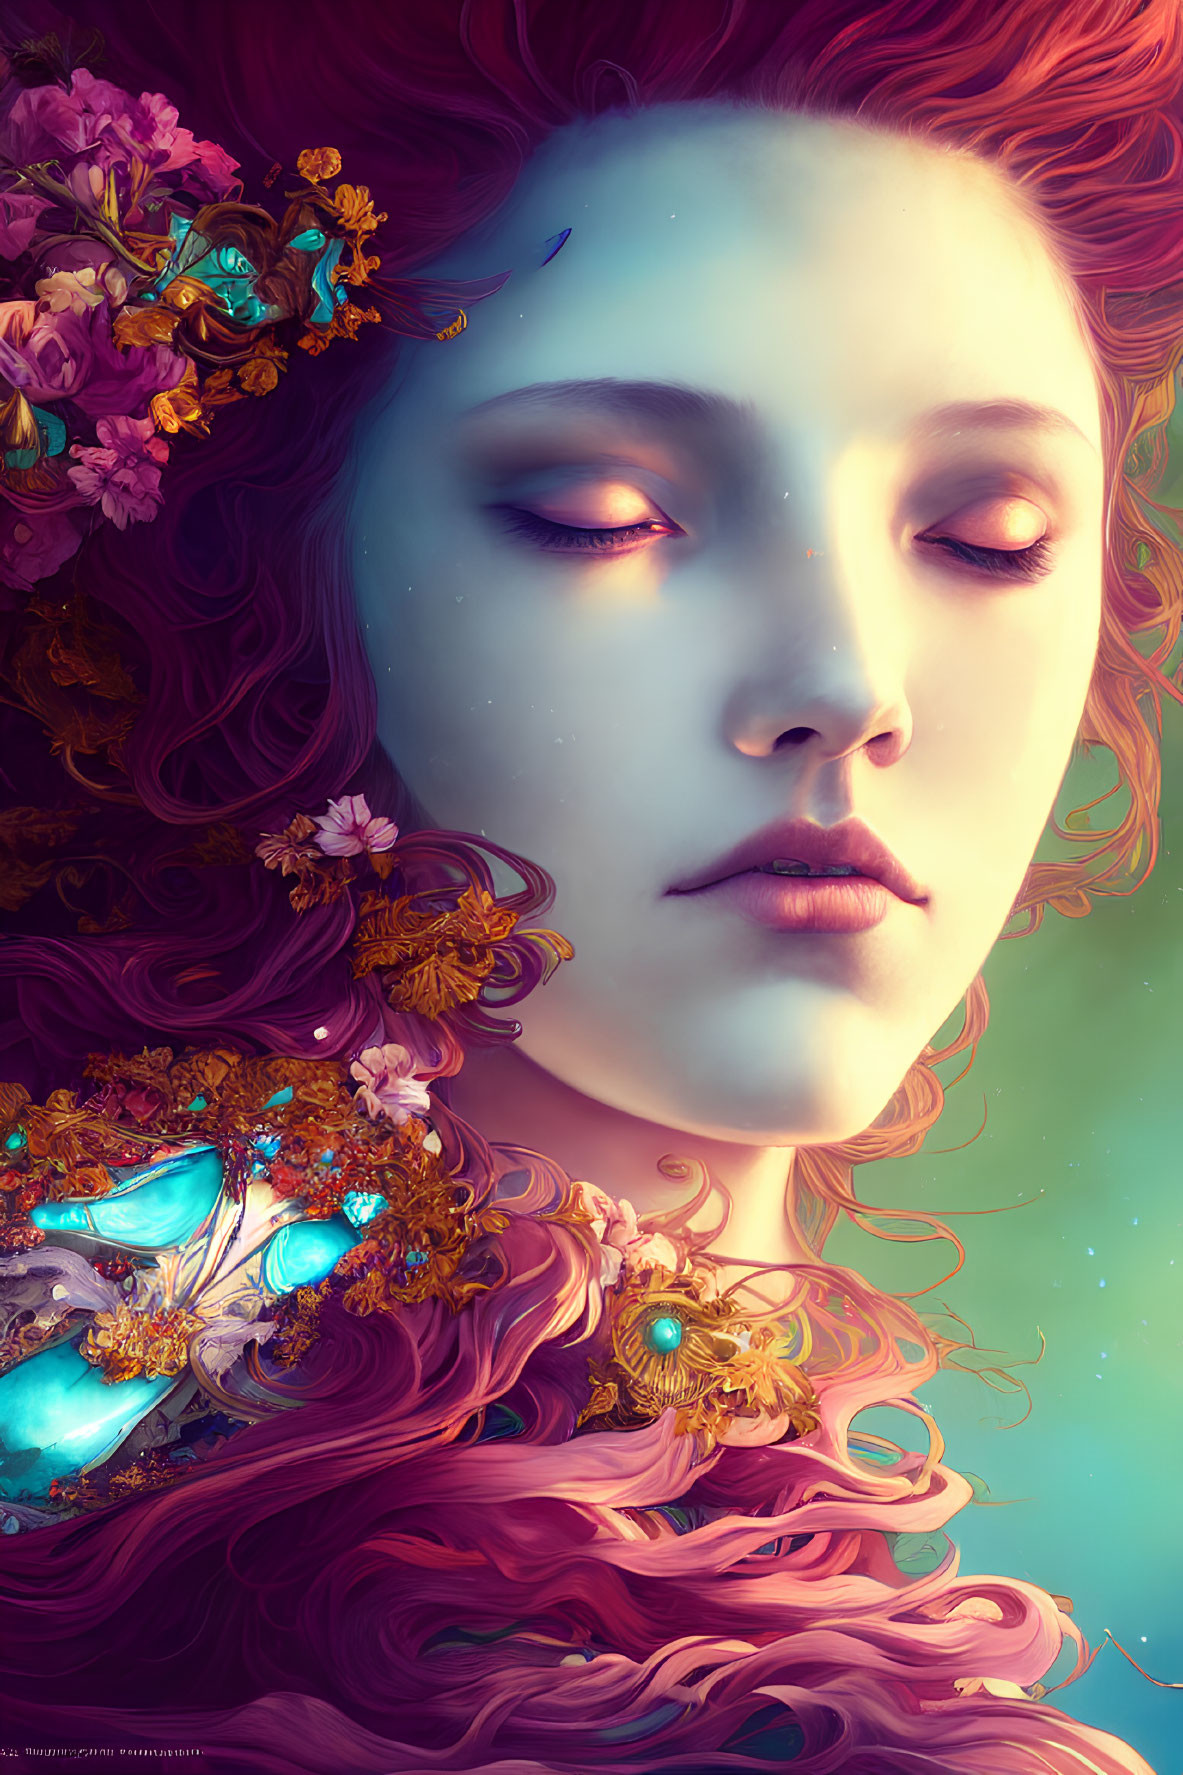 Surreal portrait of woman with pink hair, blue skin, and floral butterfly elements